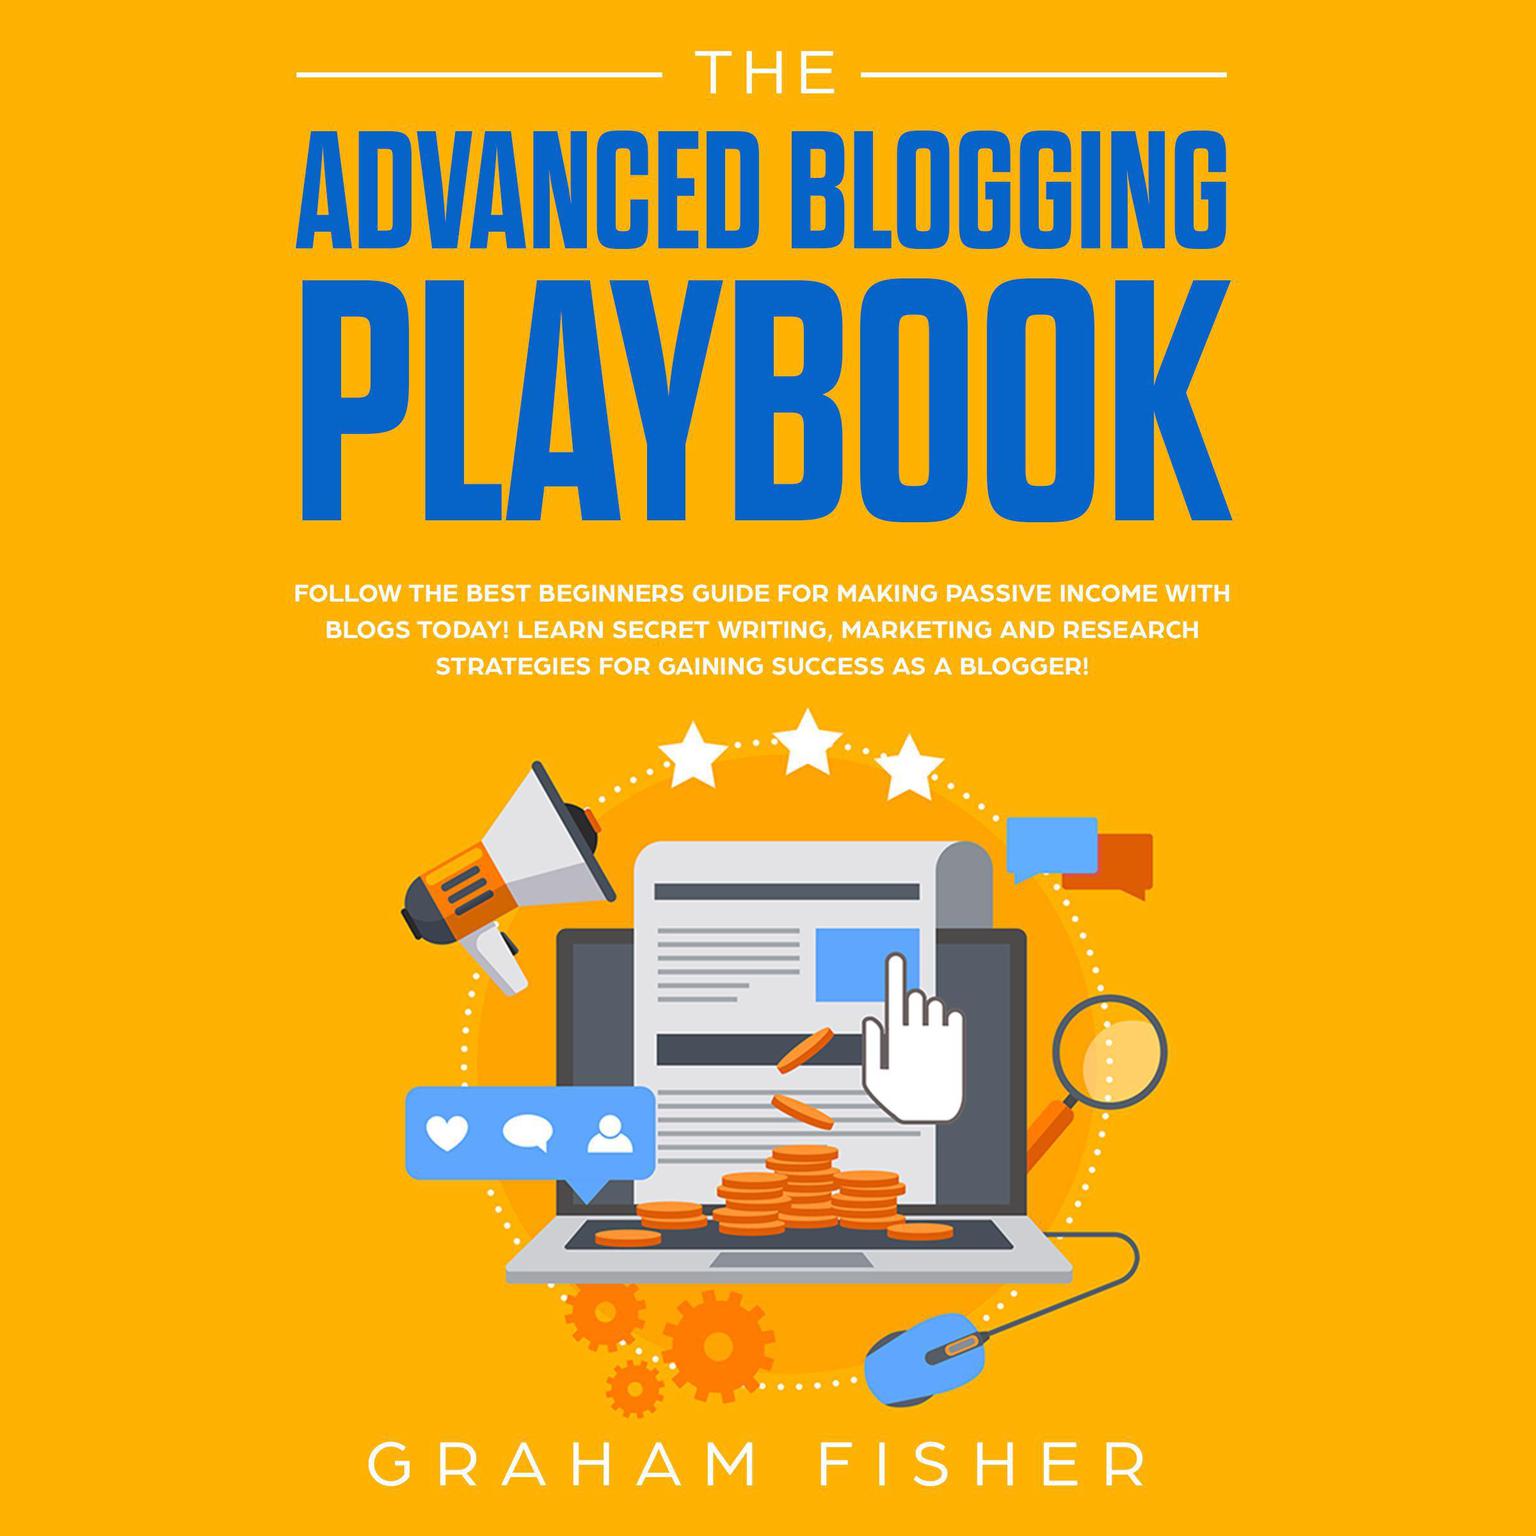 The Advanced Blogging Playbook: Follow the Best Beginners Guide for Making Passive Income with Blogs Today! Learn Secret Writing, Marketing and Research Strategies for Gaining Success as a Blogger! Audiobook, by Graham Fisher